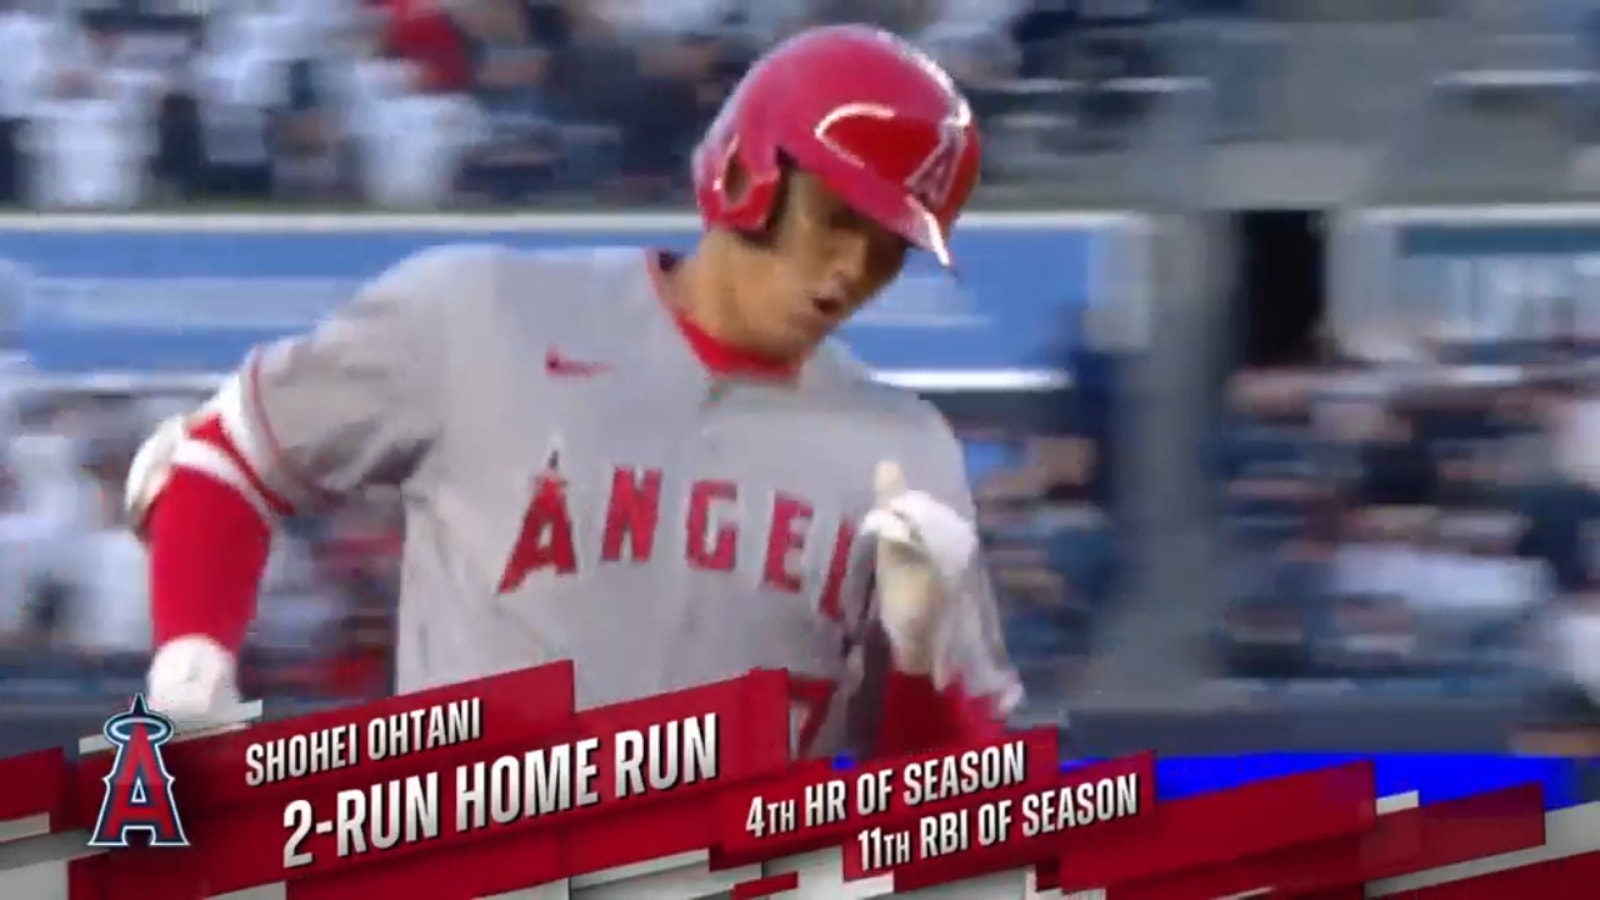 Shohei Ohtani fires a two-run homer to right-center field vs. the Yankees